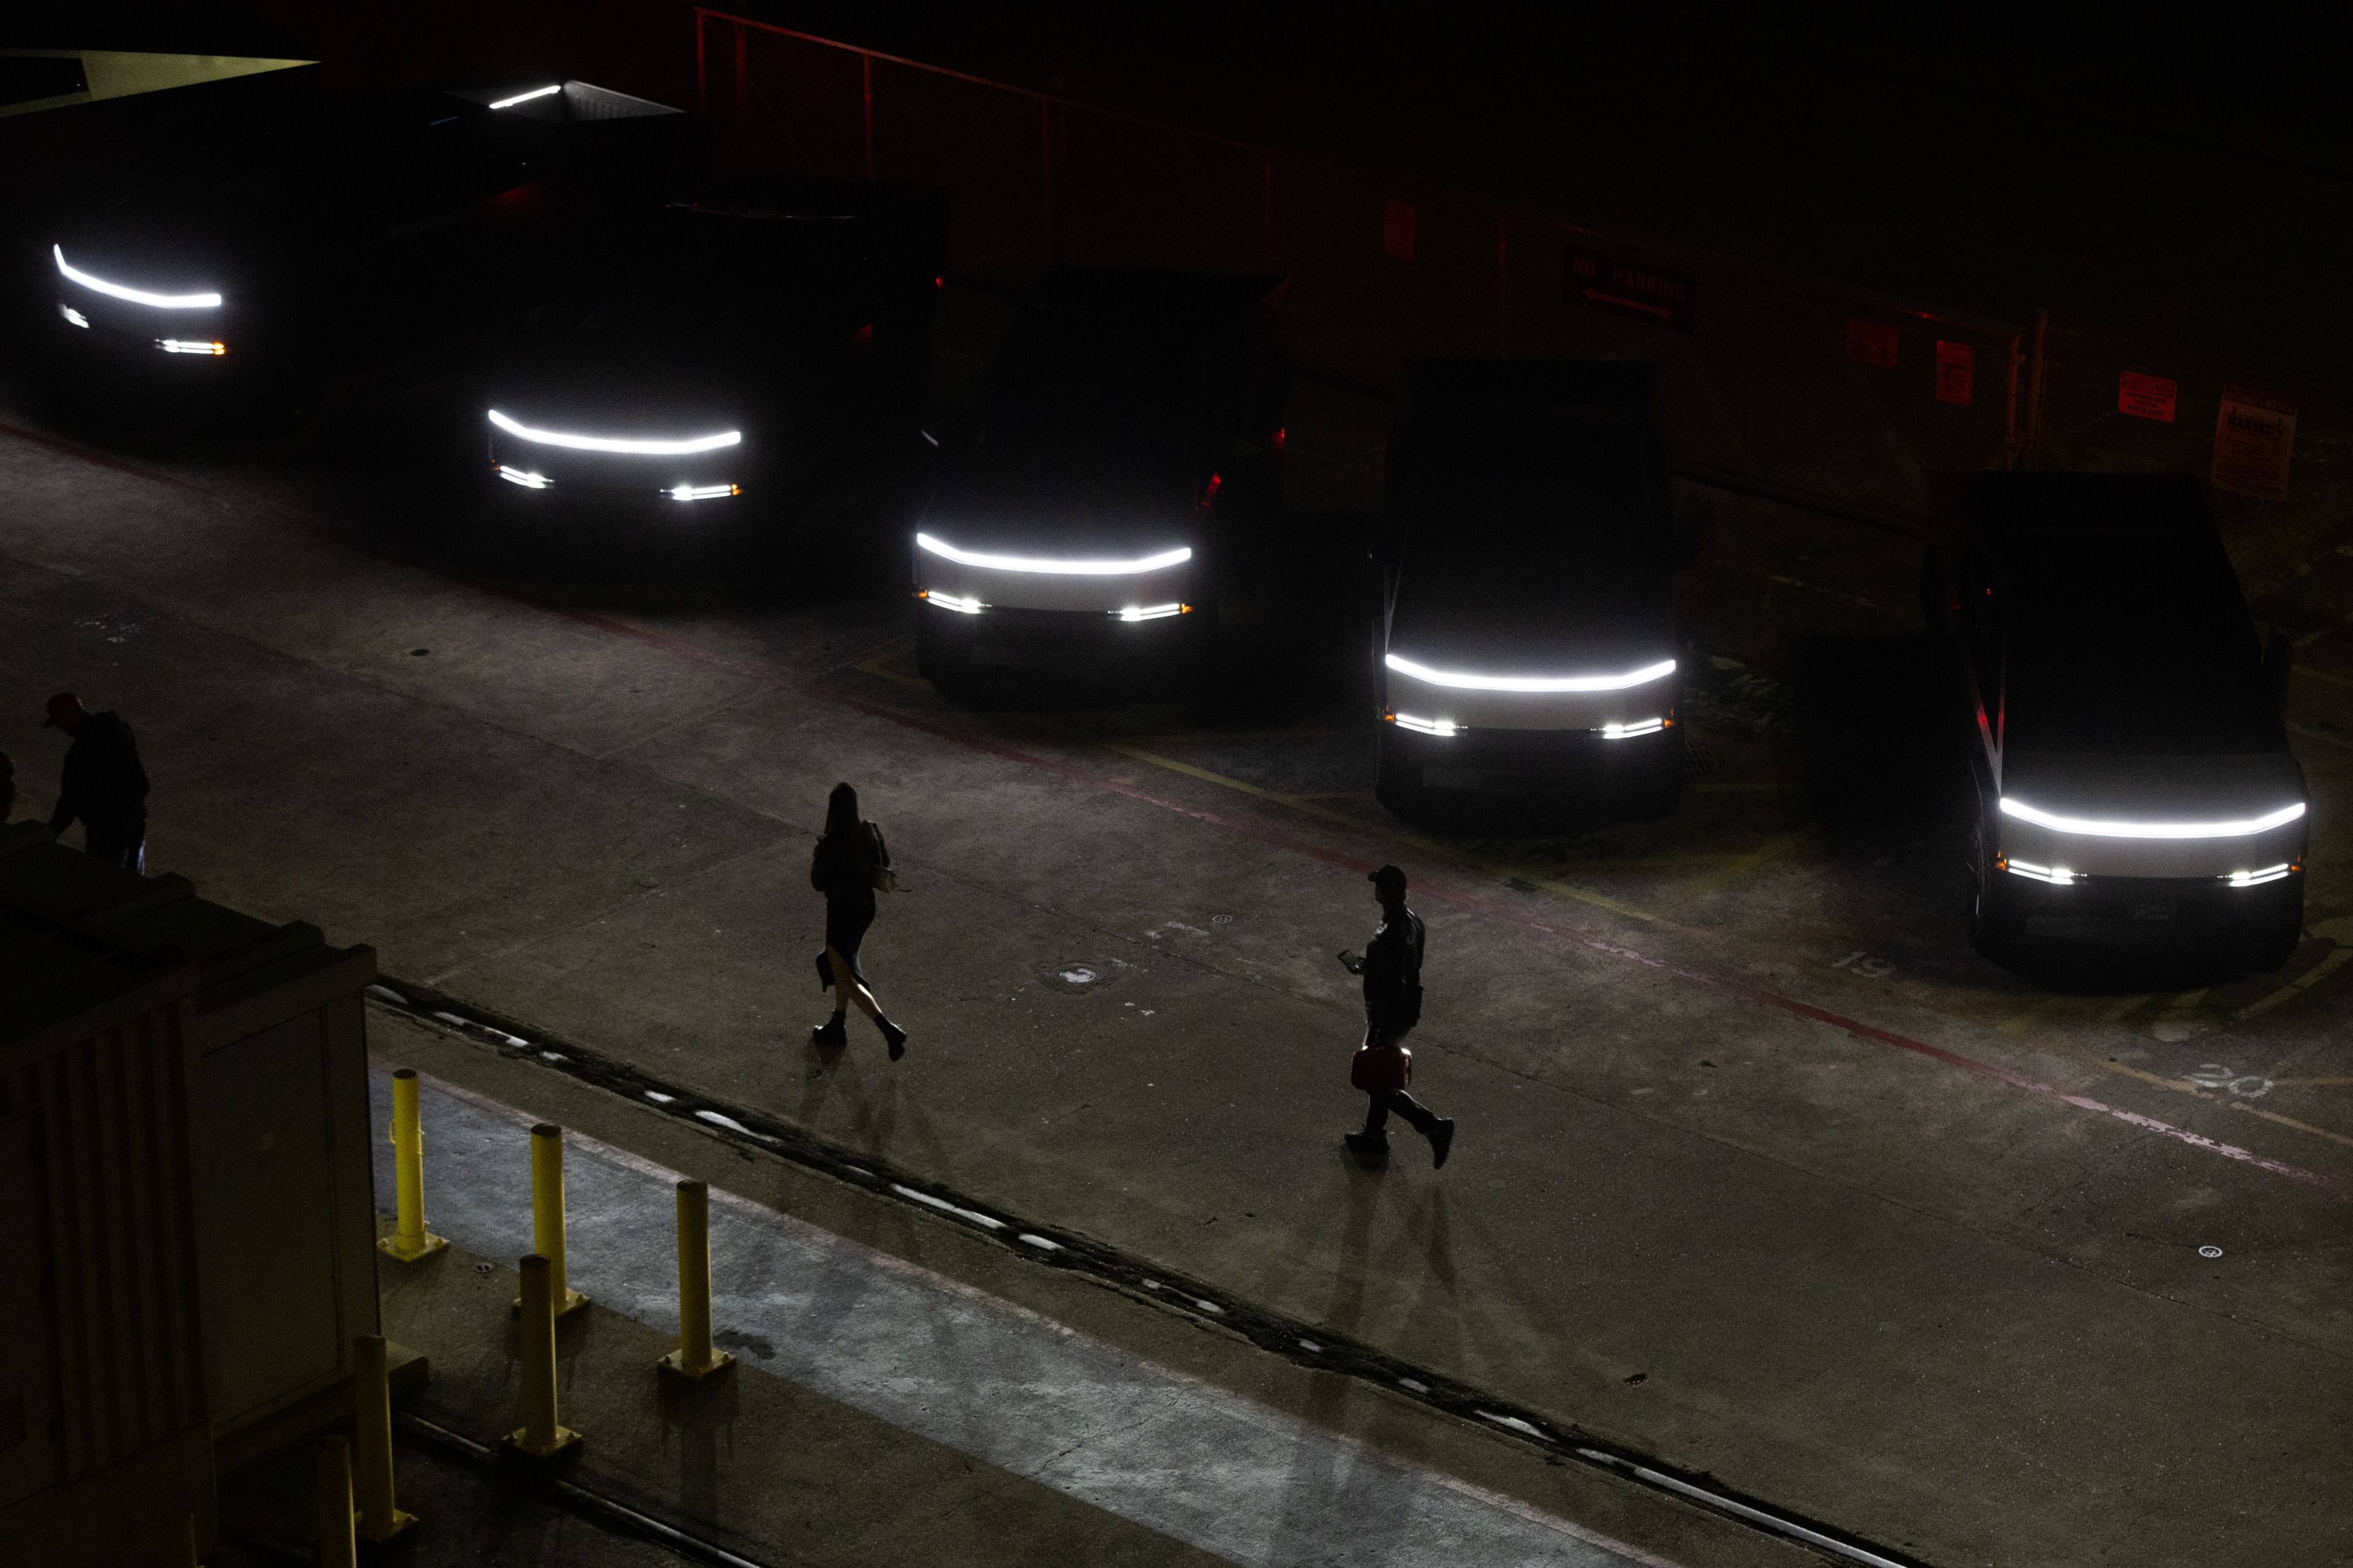 In a dimly lit parking lot, a line of parked vehicles with bright horizontal headlights faces forward while two people walk in the foreground, casting long shadows.